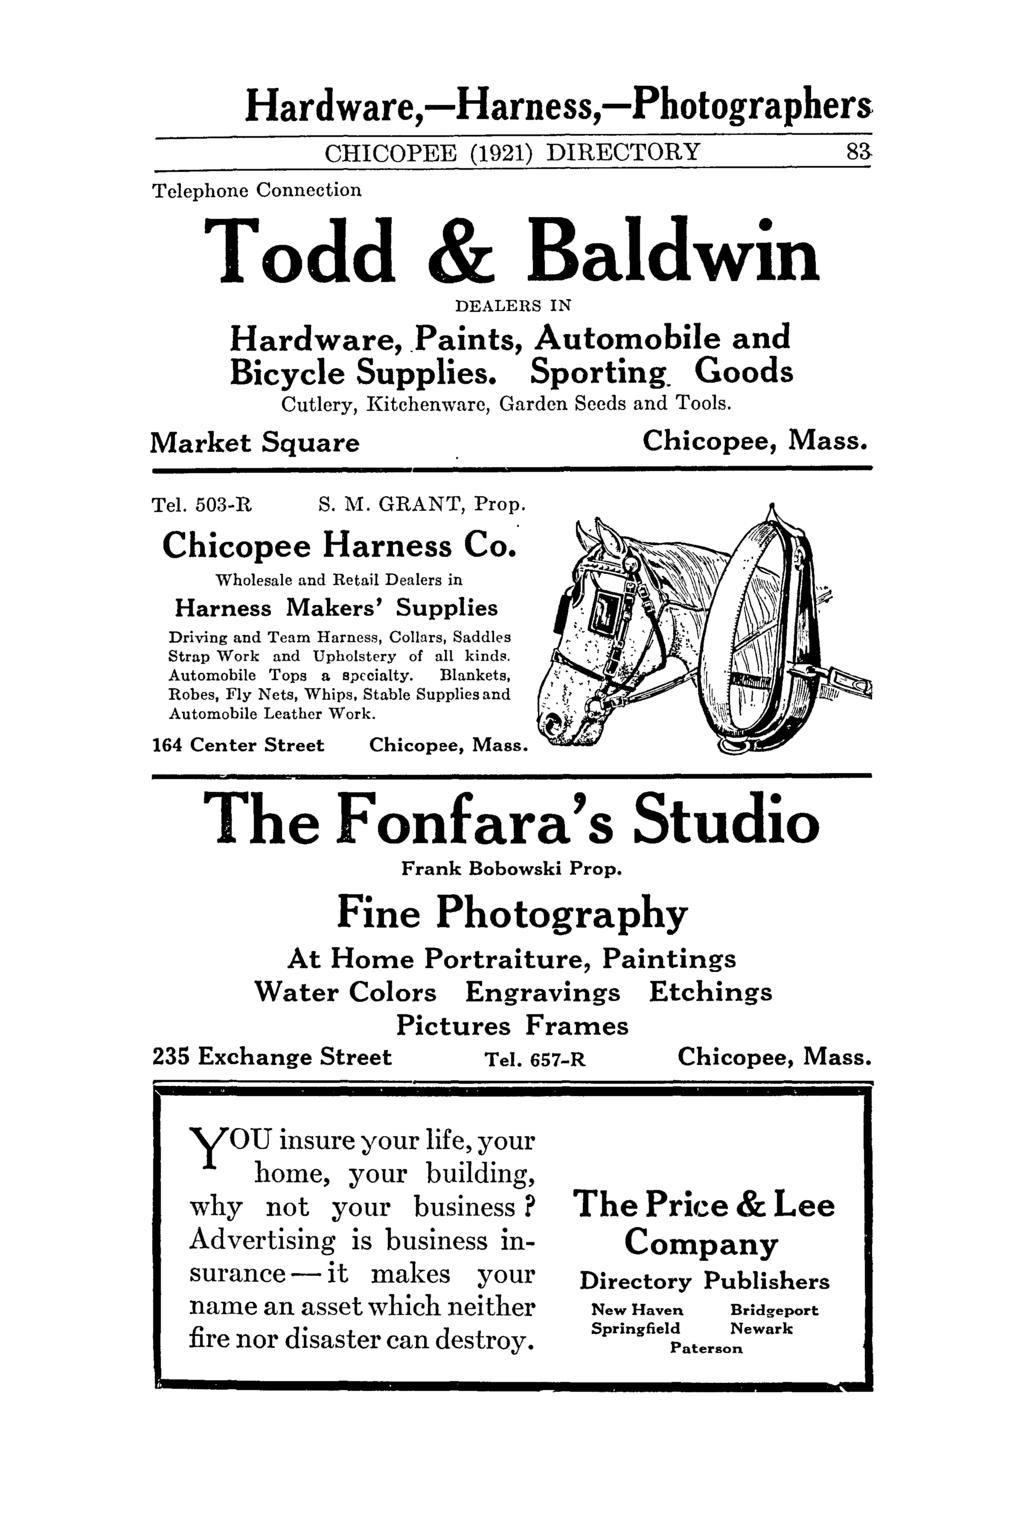 Hardware,-Harness,-Photographers CHICOPEE (1921) DIRECTORY Telephone Connection Todd & Baldwin DEALERS IN Hardware,.Paints, Automobile and Bicycle Supplies. Sporting.